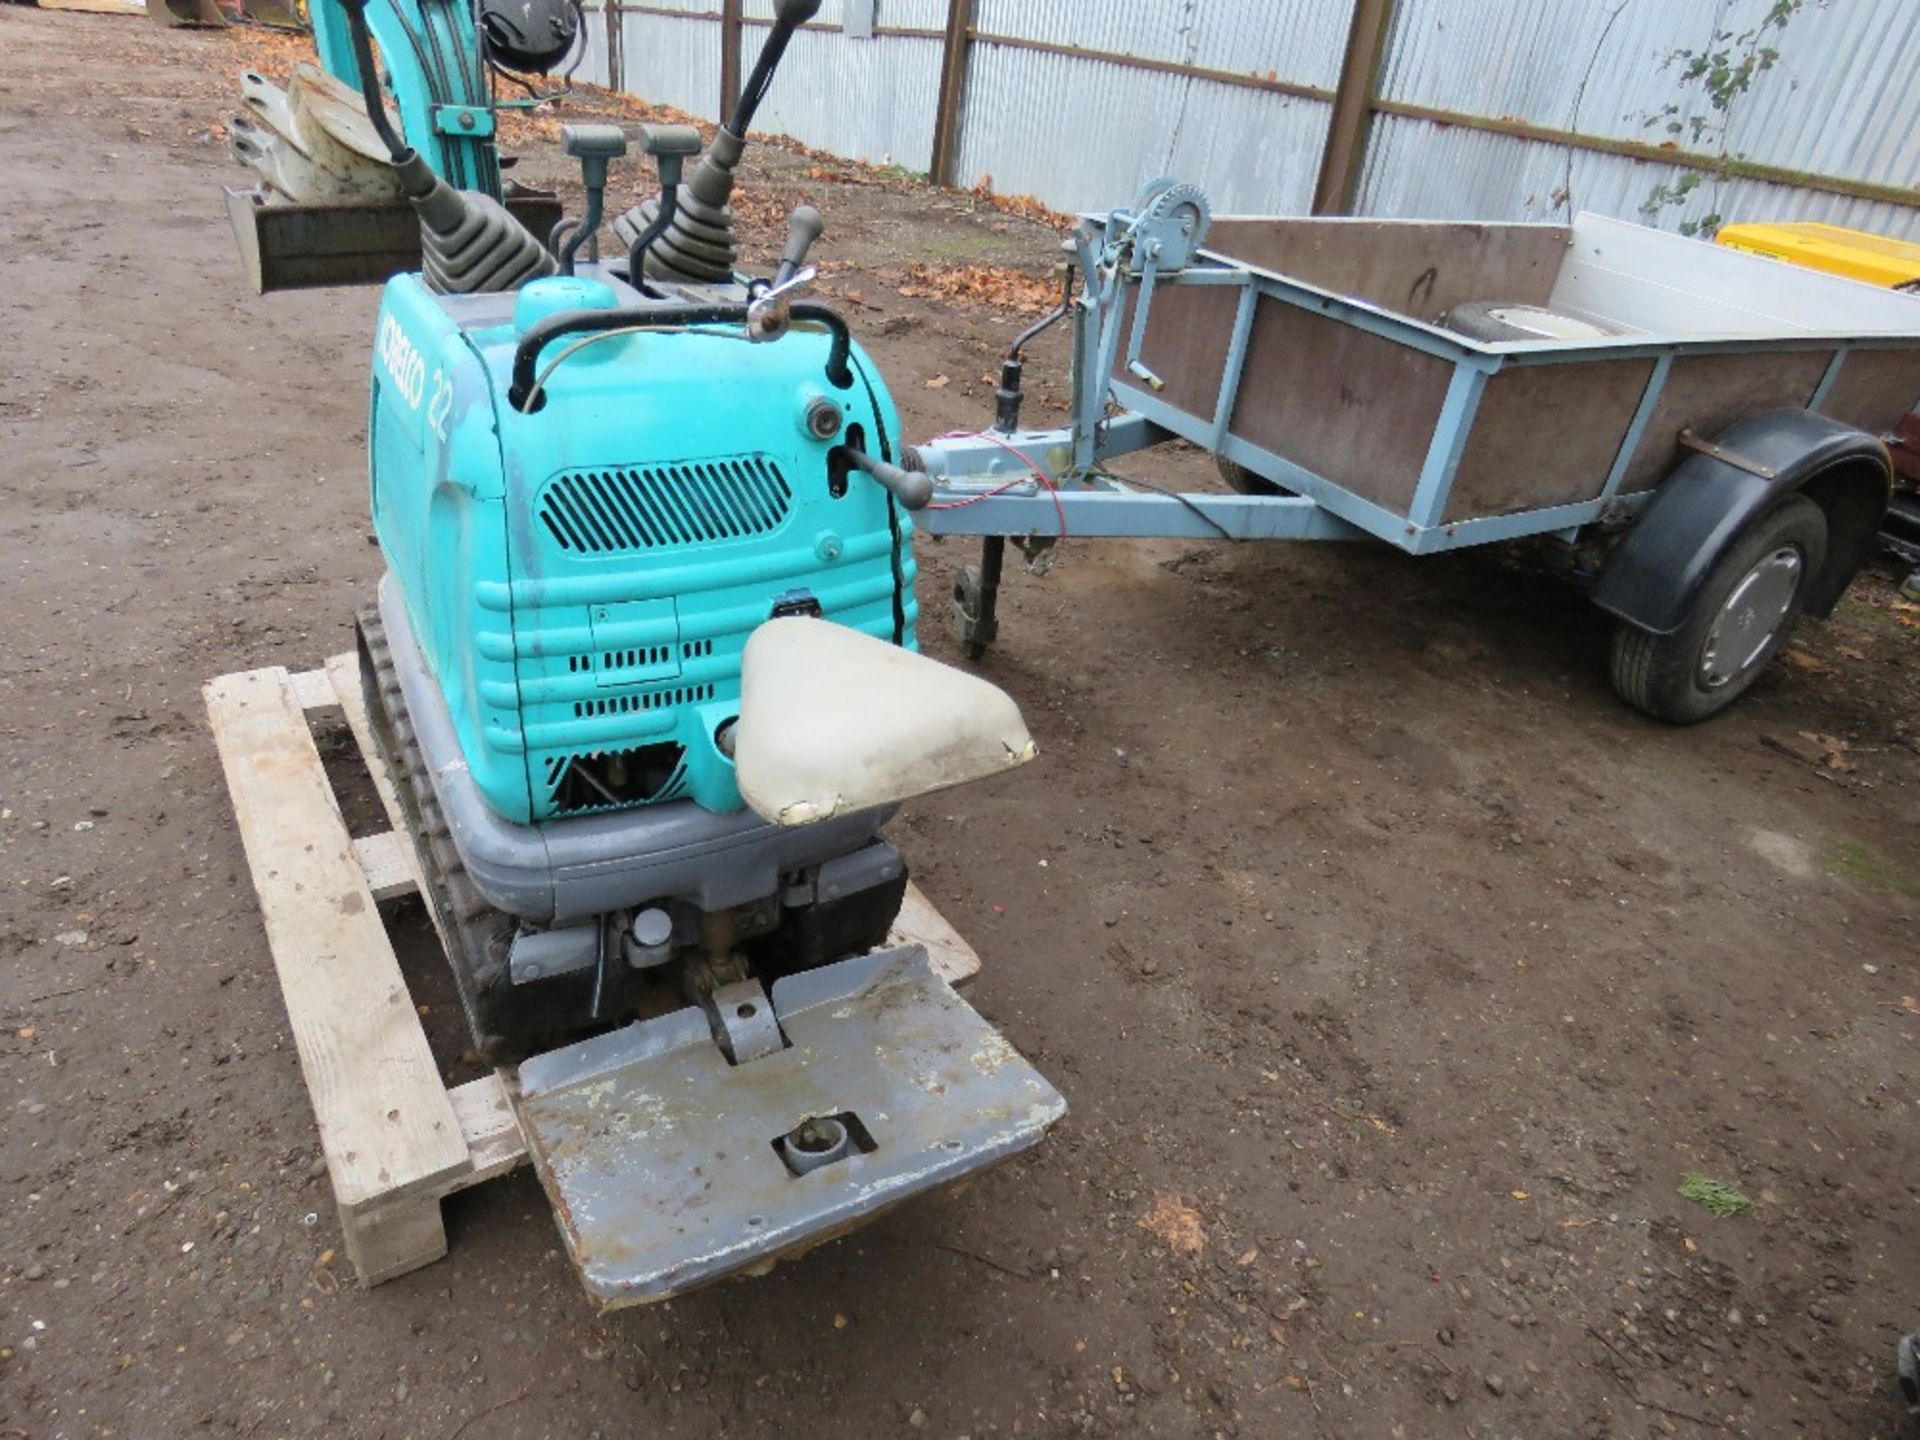 KOBELCO 22 MICRO EXCAVATOR WITH 2 X BUCKETS. PETROL ENGINED, 1049 REC HOURS. SN:FS-01494. THIS LOT I - Image 3 of 8